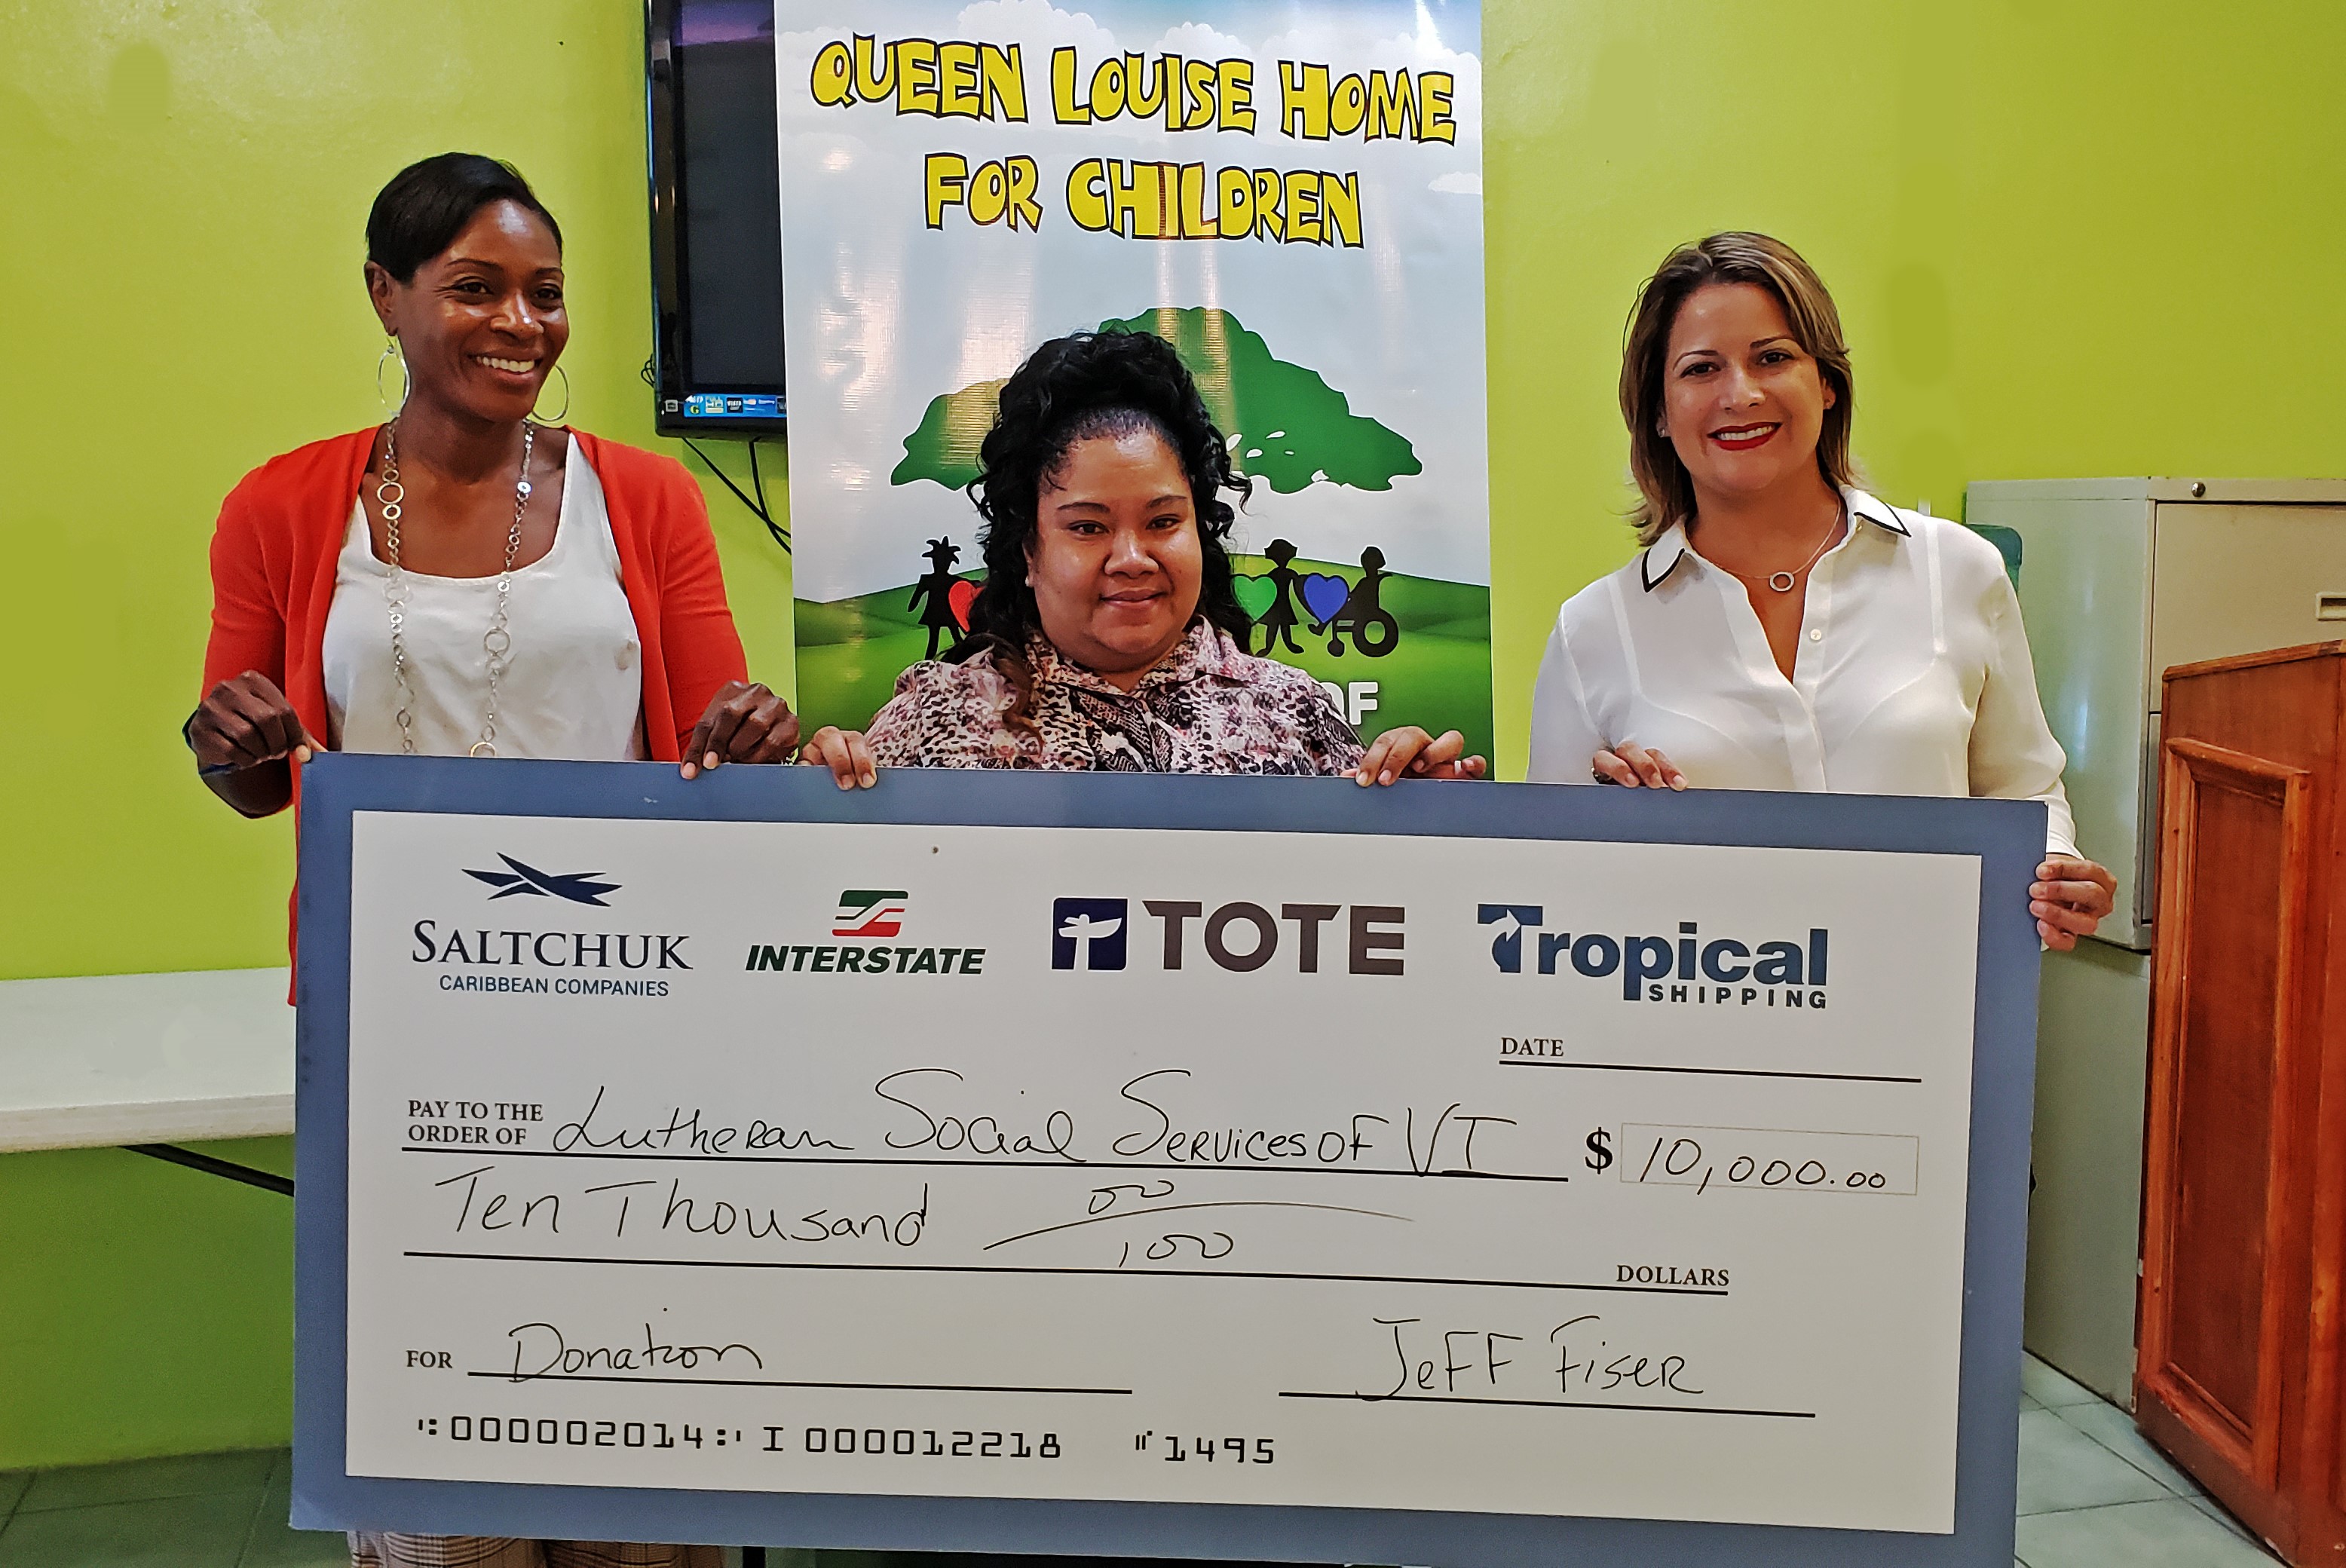 Tropical Shipping & Saltchuk Donate $10,000 To Queen Louise Home For Children